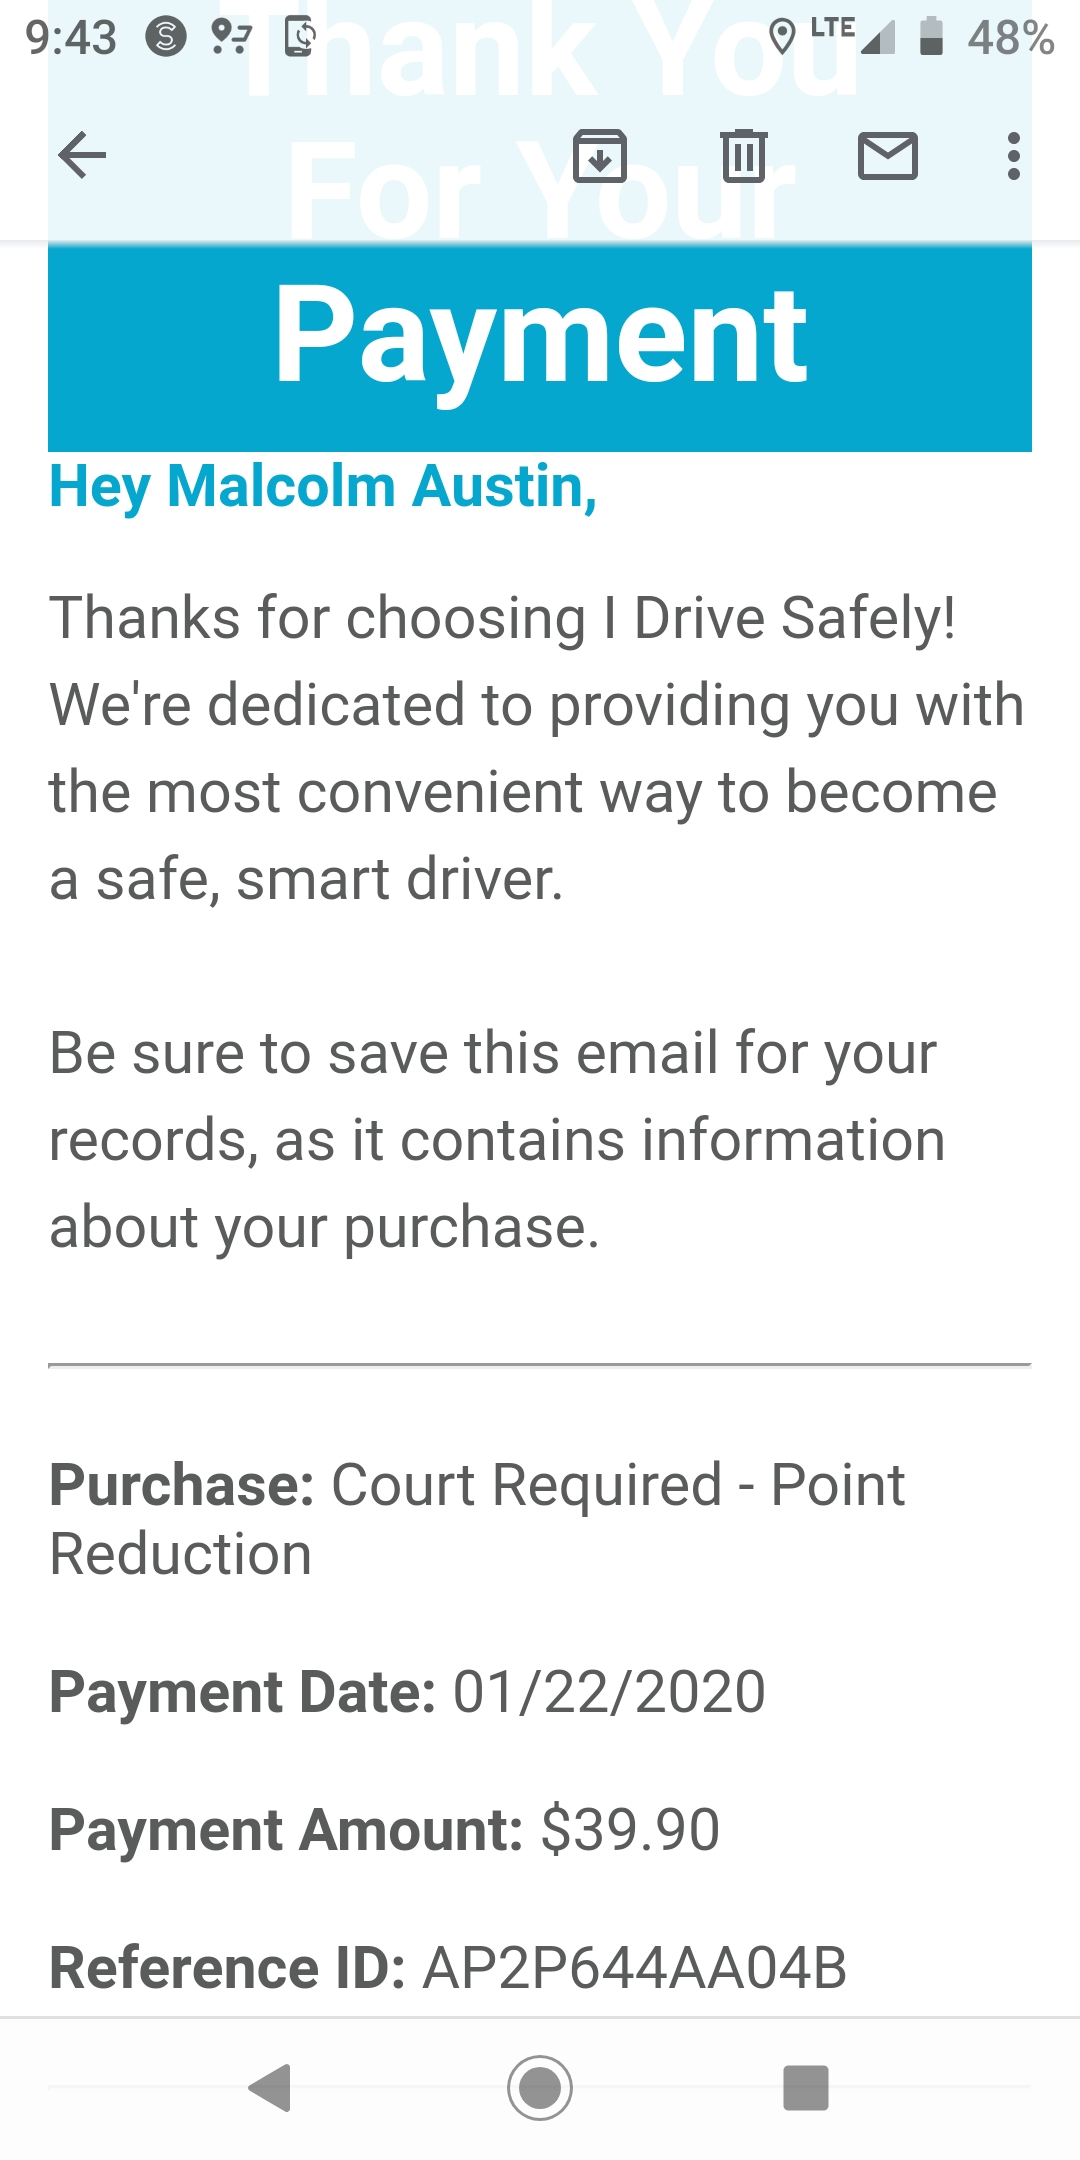 idrive safely number